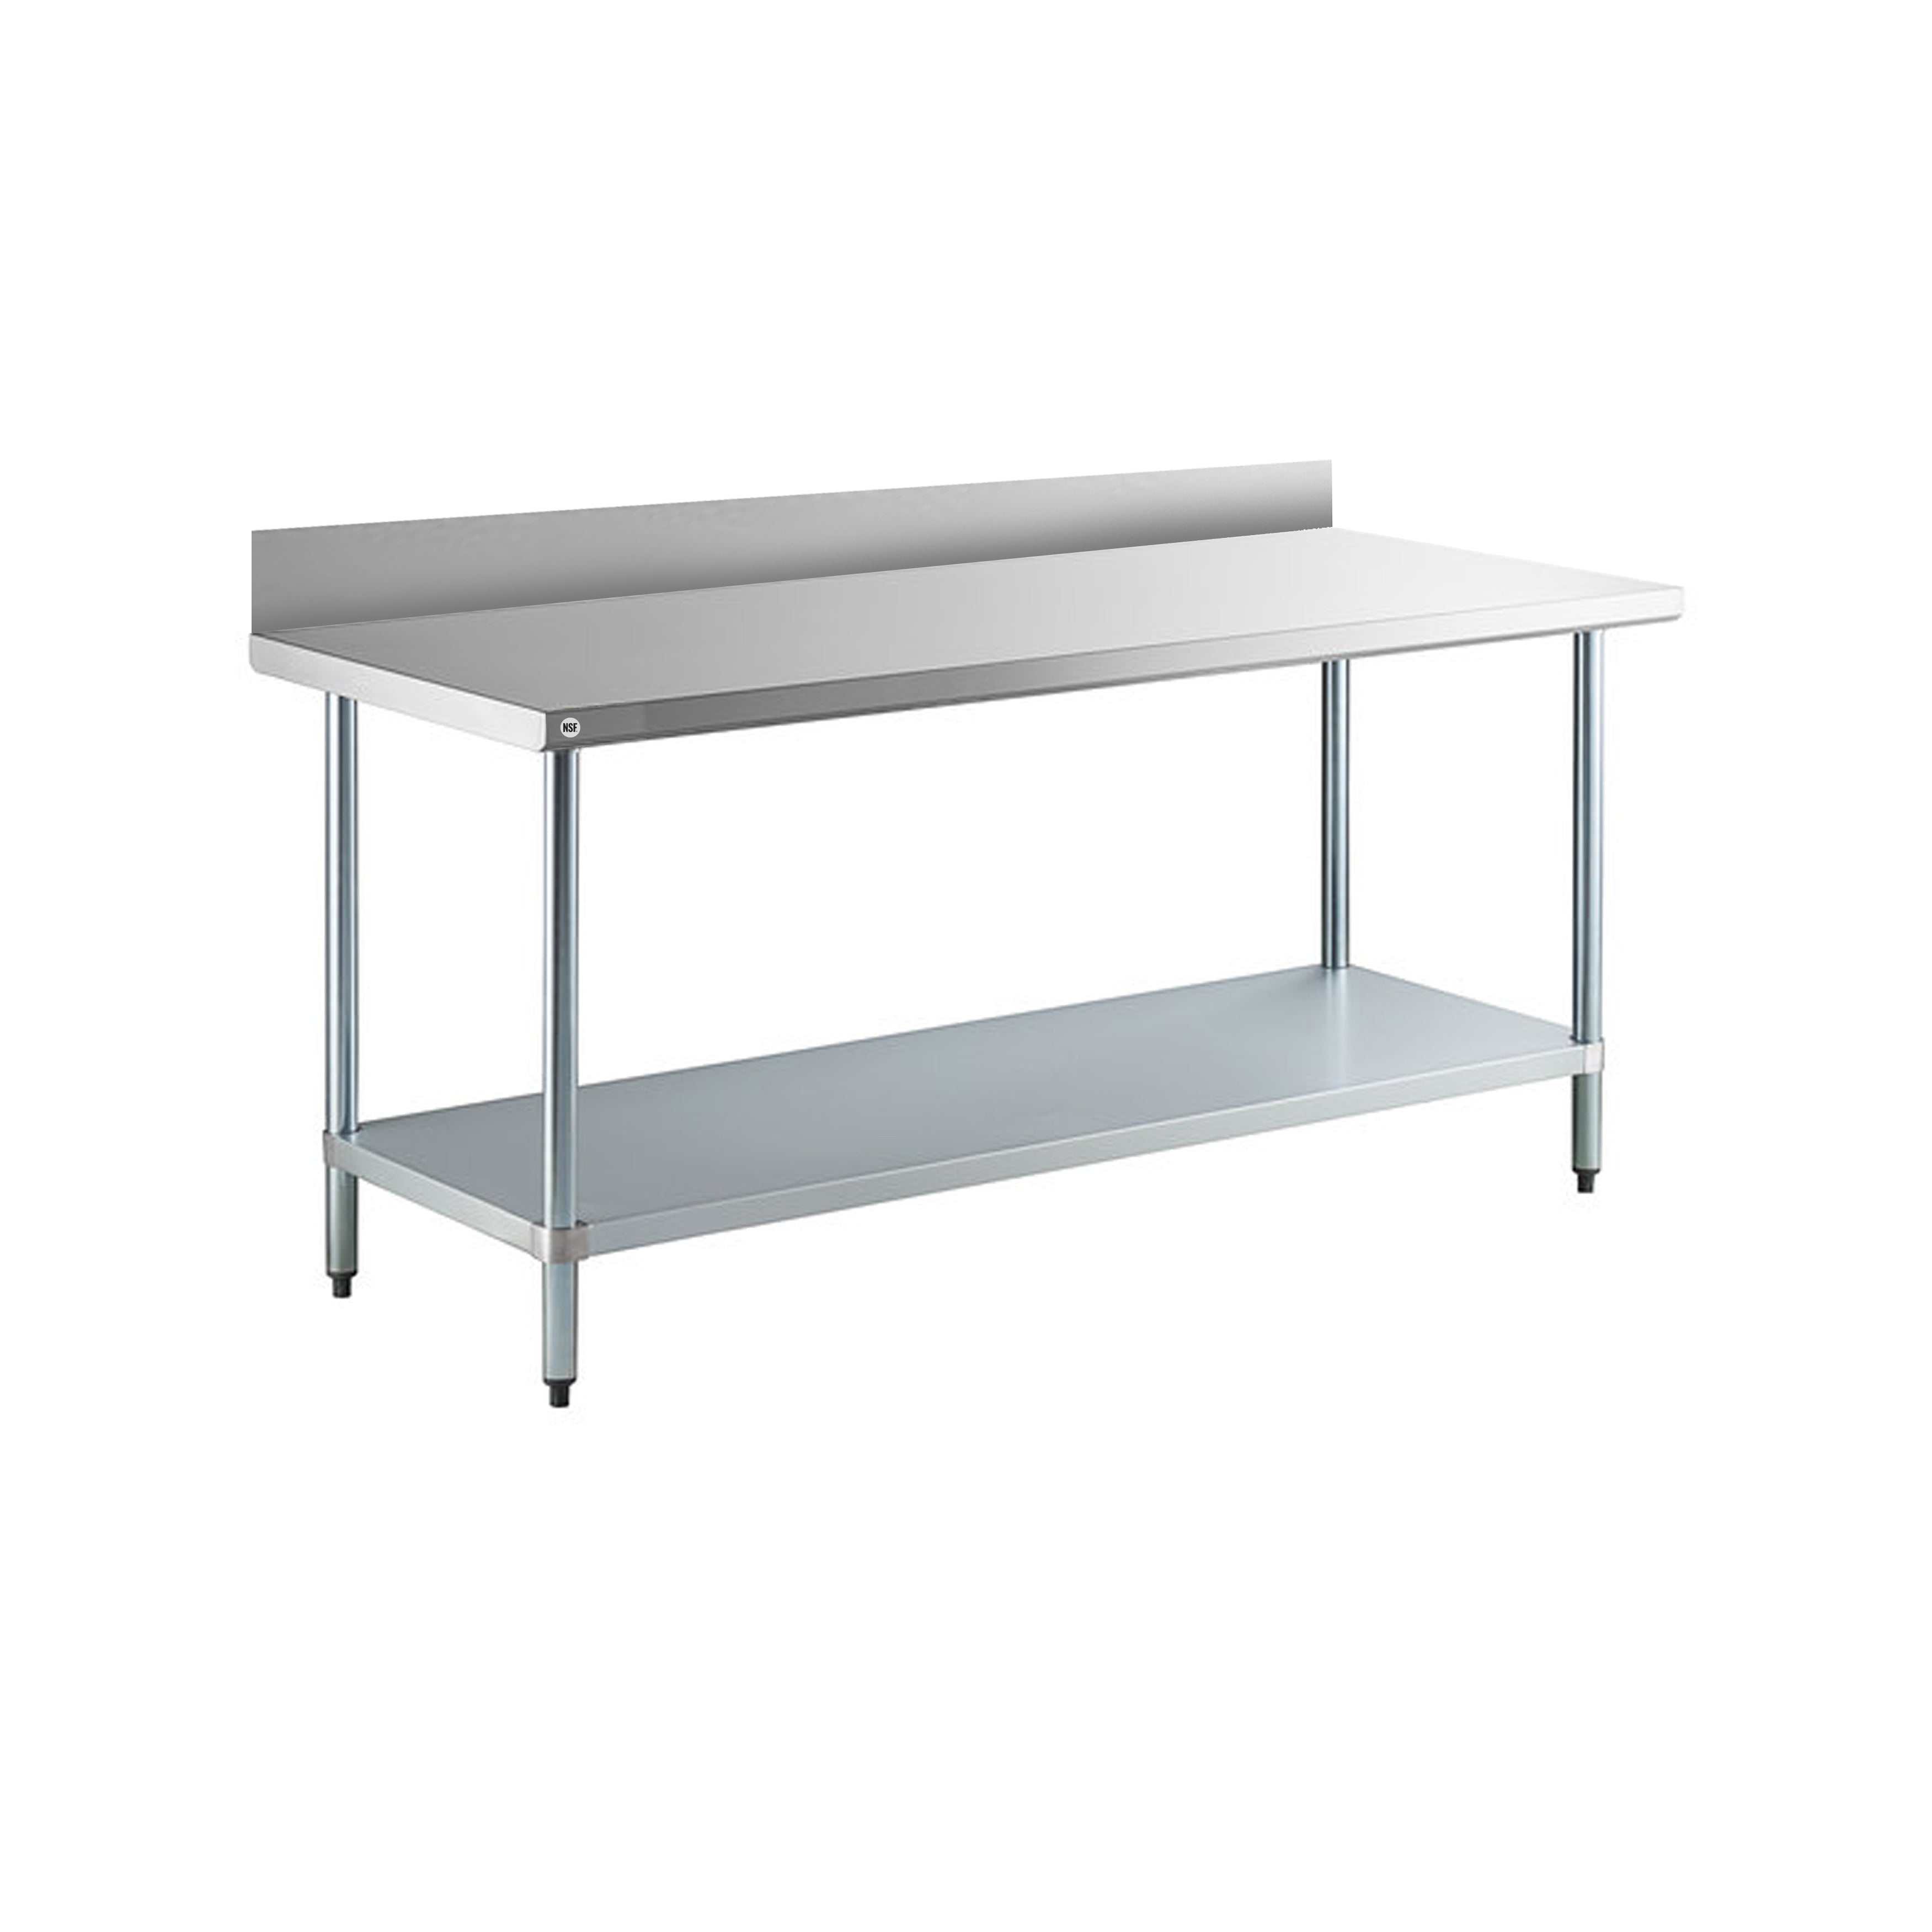 Omcan - 23800, Commercial 96" x 24" Stainless Steel Kitchen Work Table with 4" Back Splash 1600lbs Medium Duty